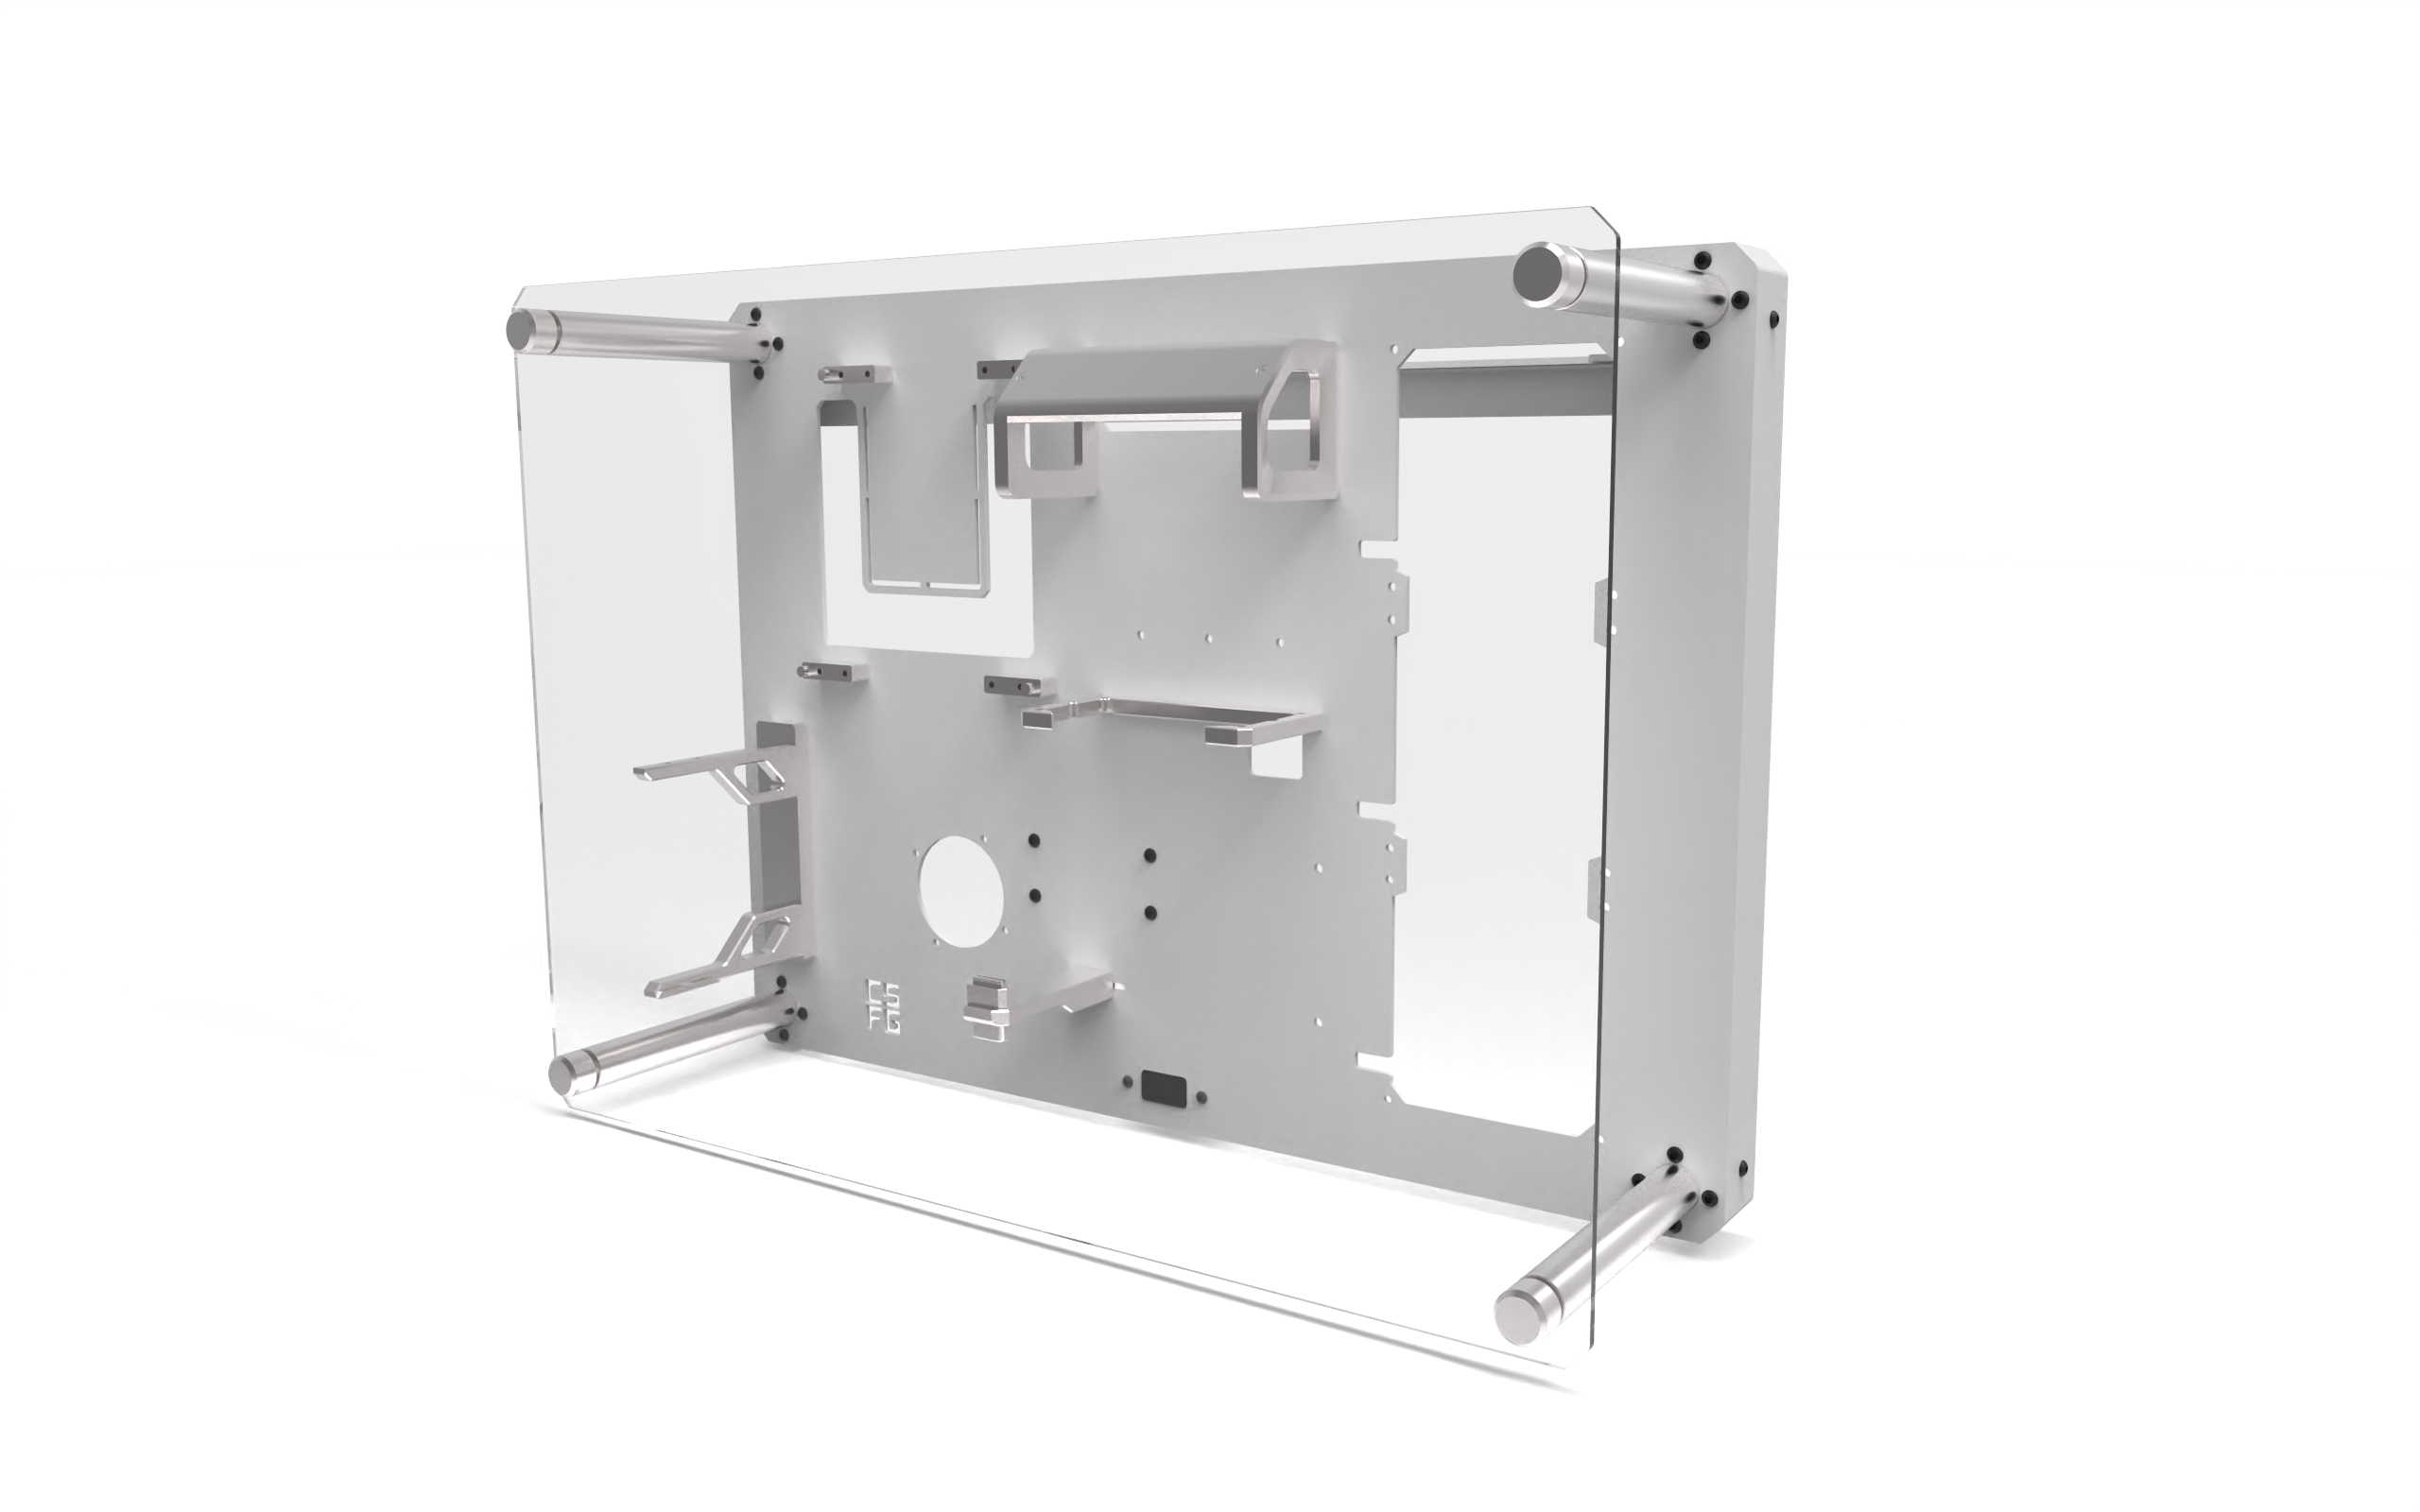 csfg-creative-solutions-for-gamers - CSFG Creative Solutions For Gamers Frostbite M-ITX Wall mounted Chassis - White